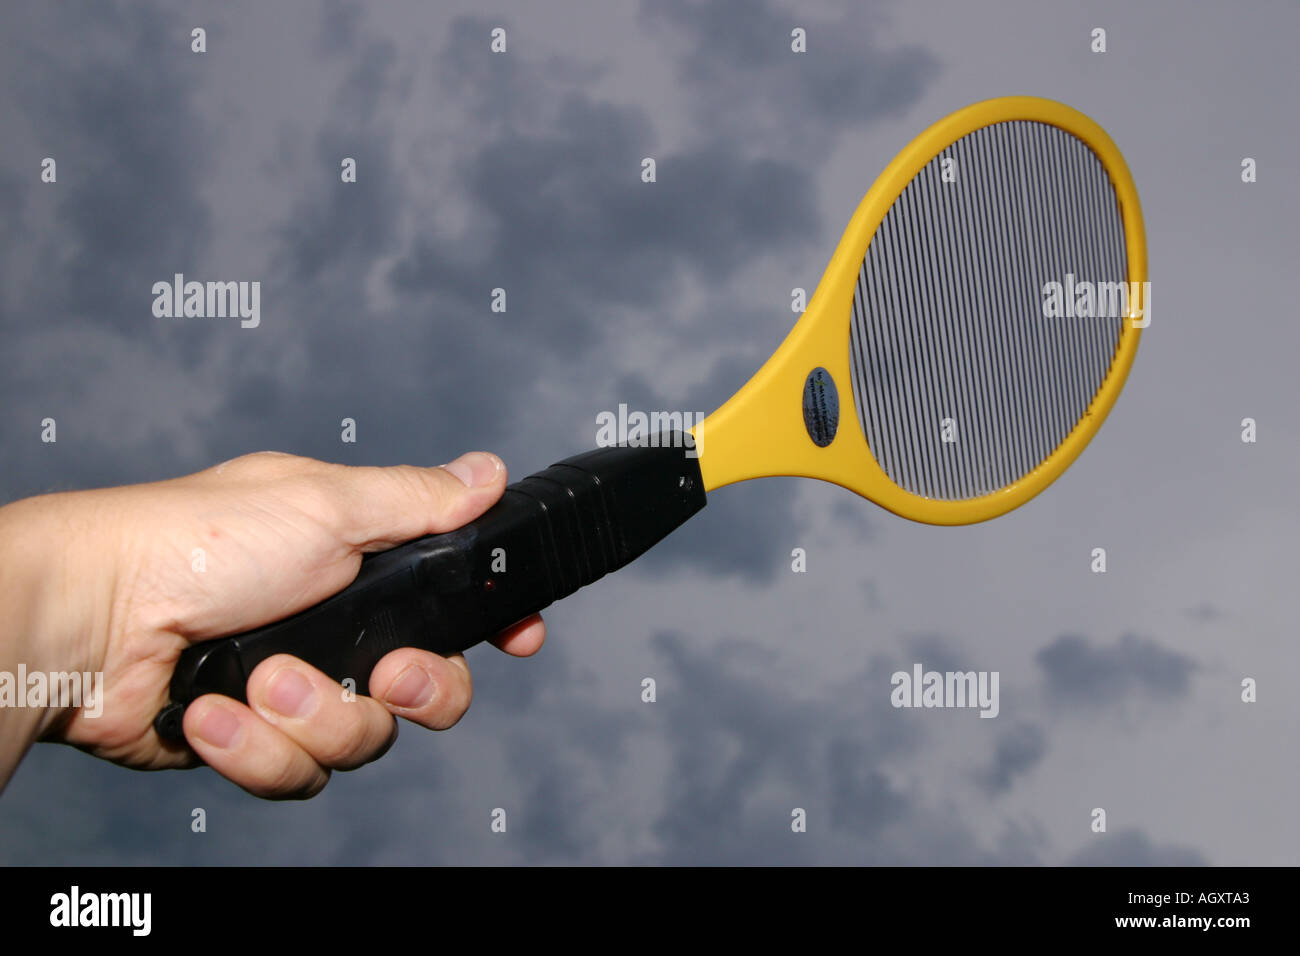 Tennis racket looking tool to electrocute insects Stock Photo